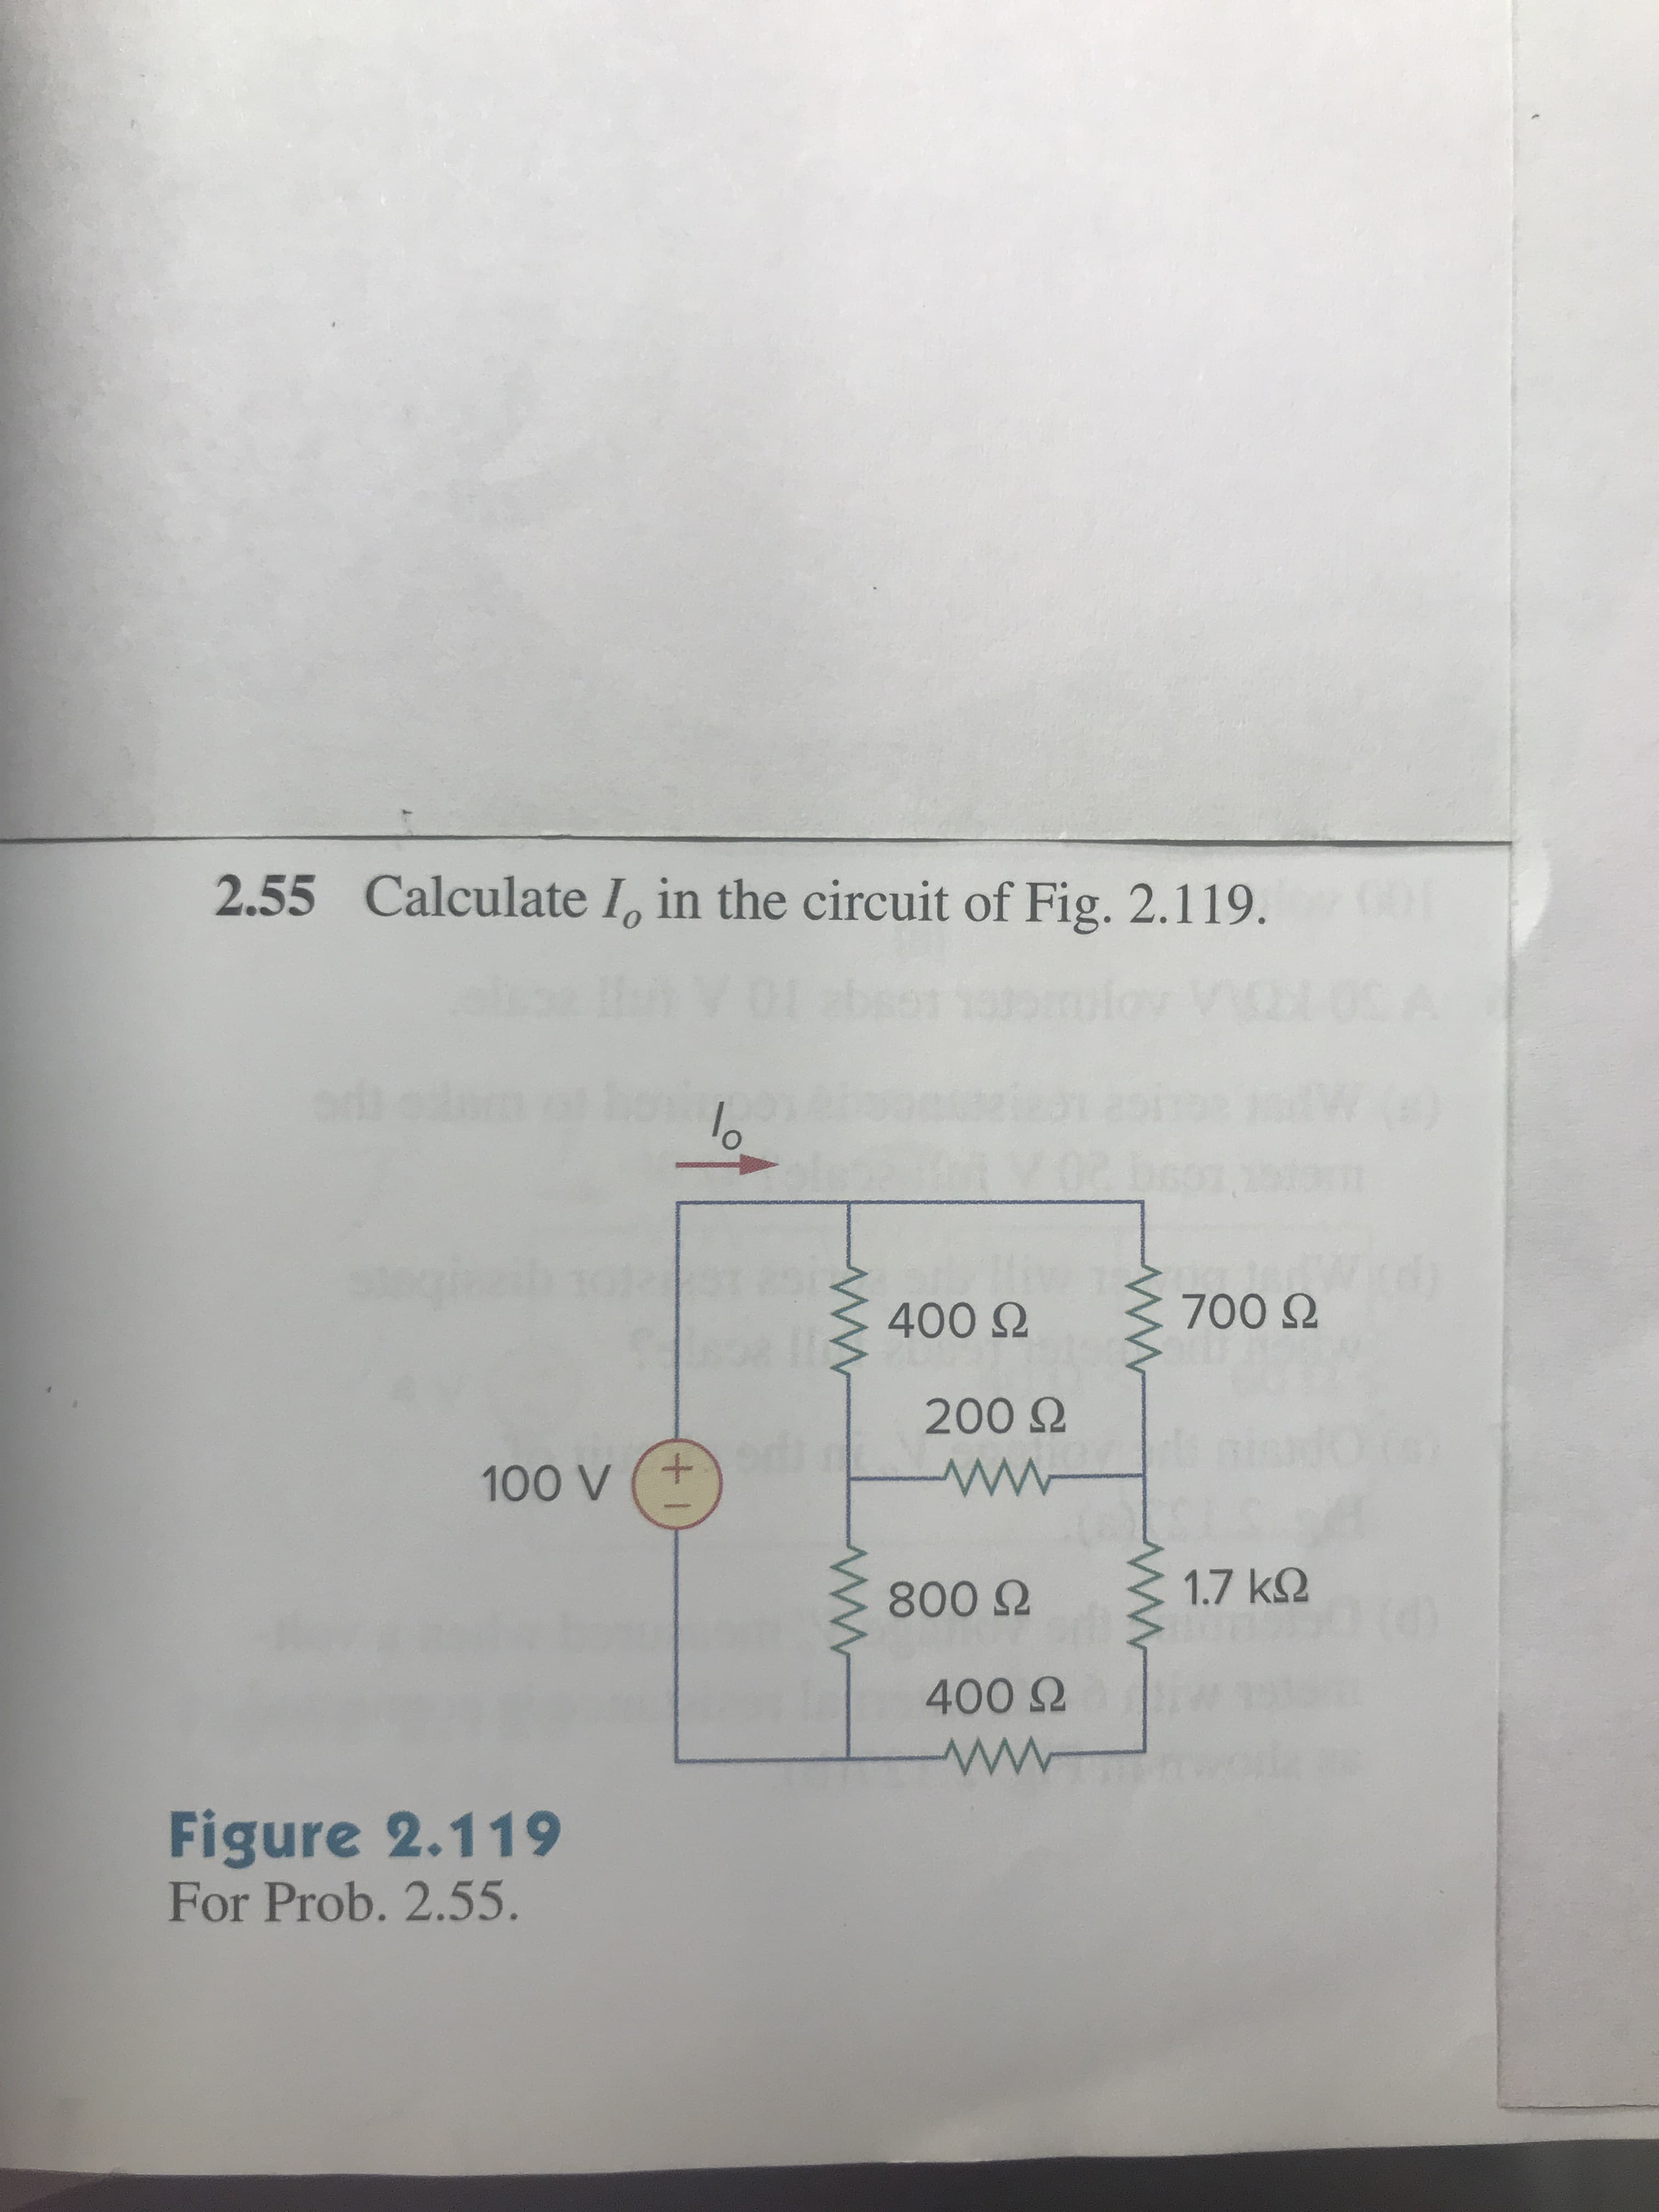 2.55
Calculate Io in the circuit of Fig. 2.119.
400 Ω
700 Ω
200 Ω
100 V (+
800 Ω
1.7 kΩ
400 Ω
Figure 2.119
For Prob. 2.55.
